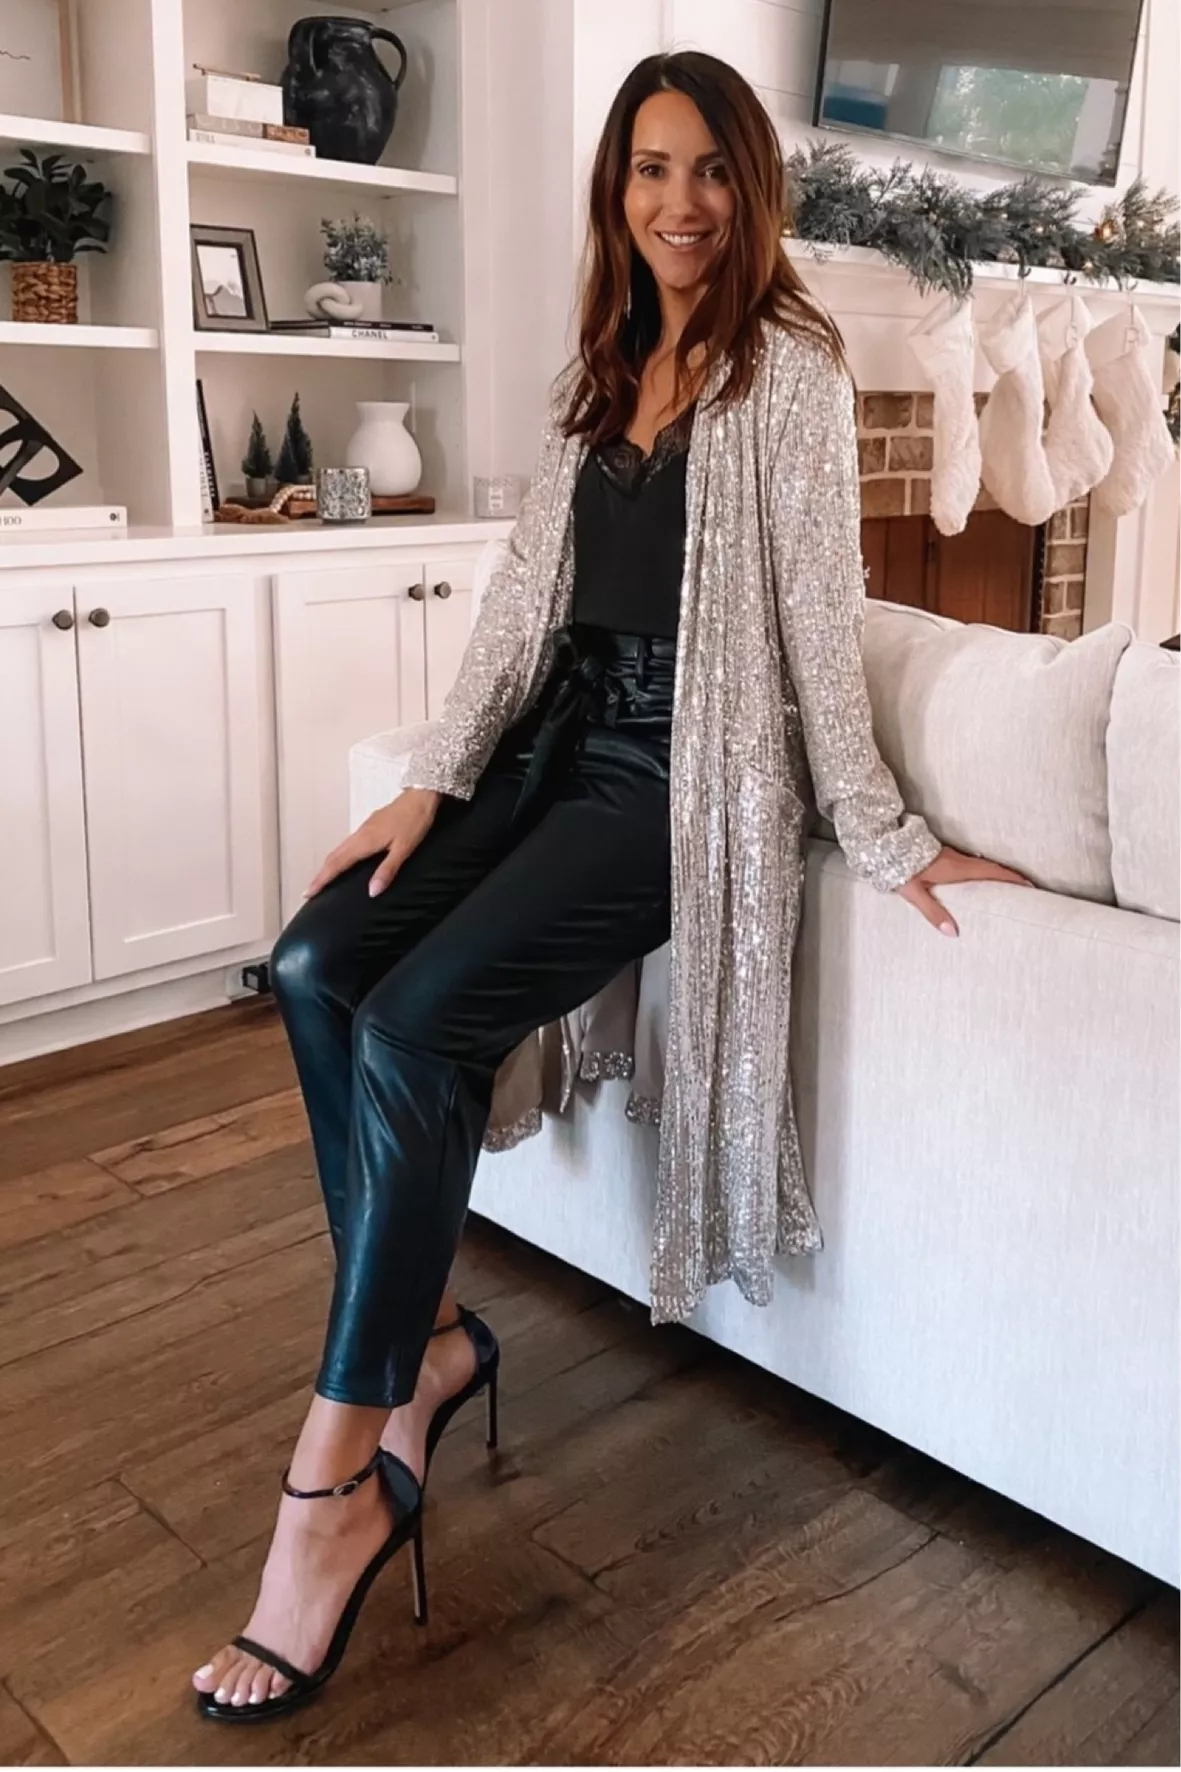 Anita Sequined Duster Jacket